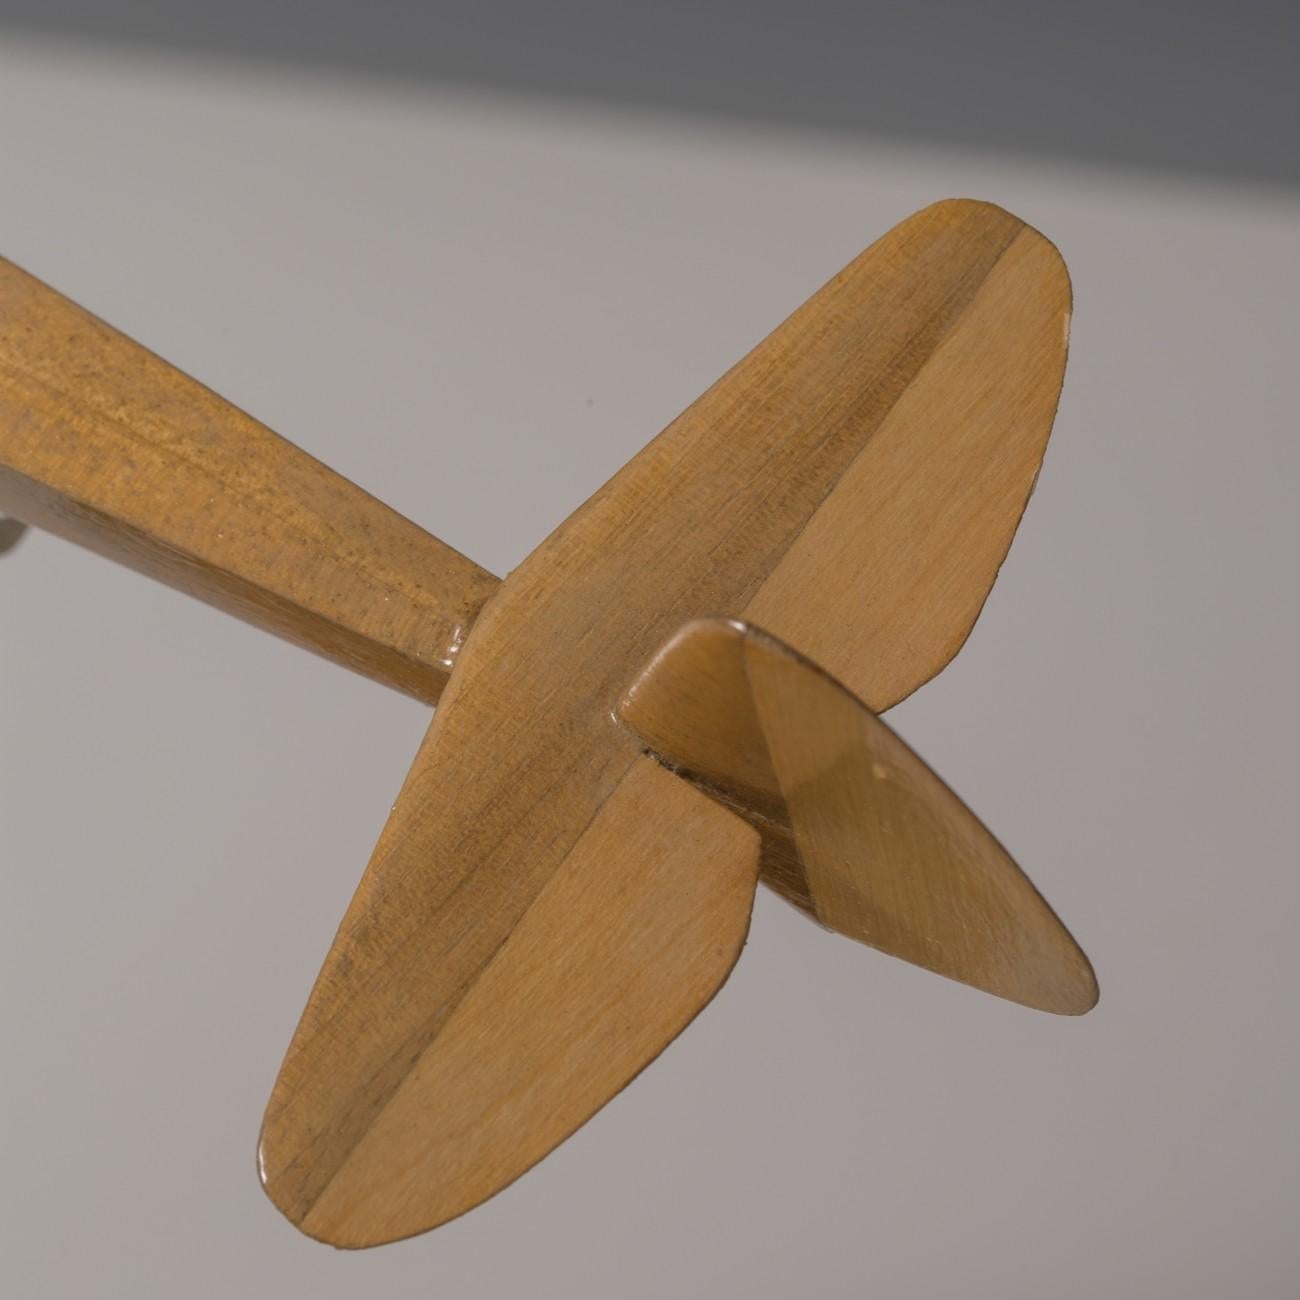 Pair of 1930s Model Wooden Gliders 14